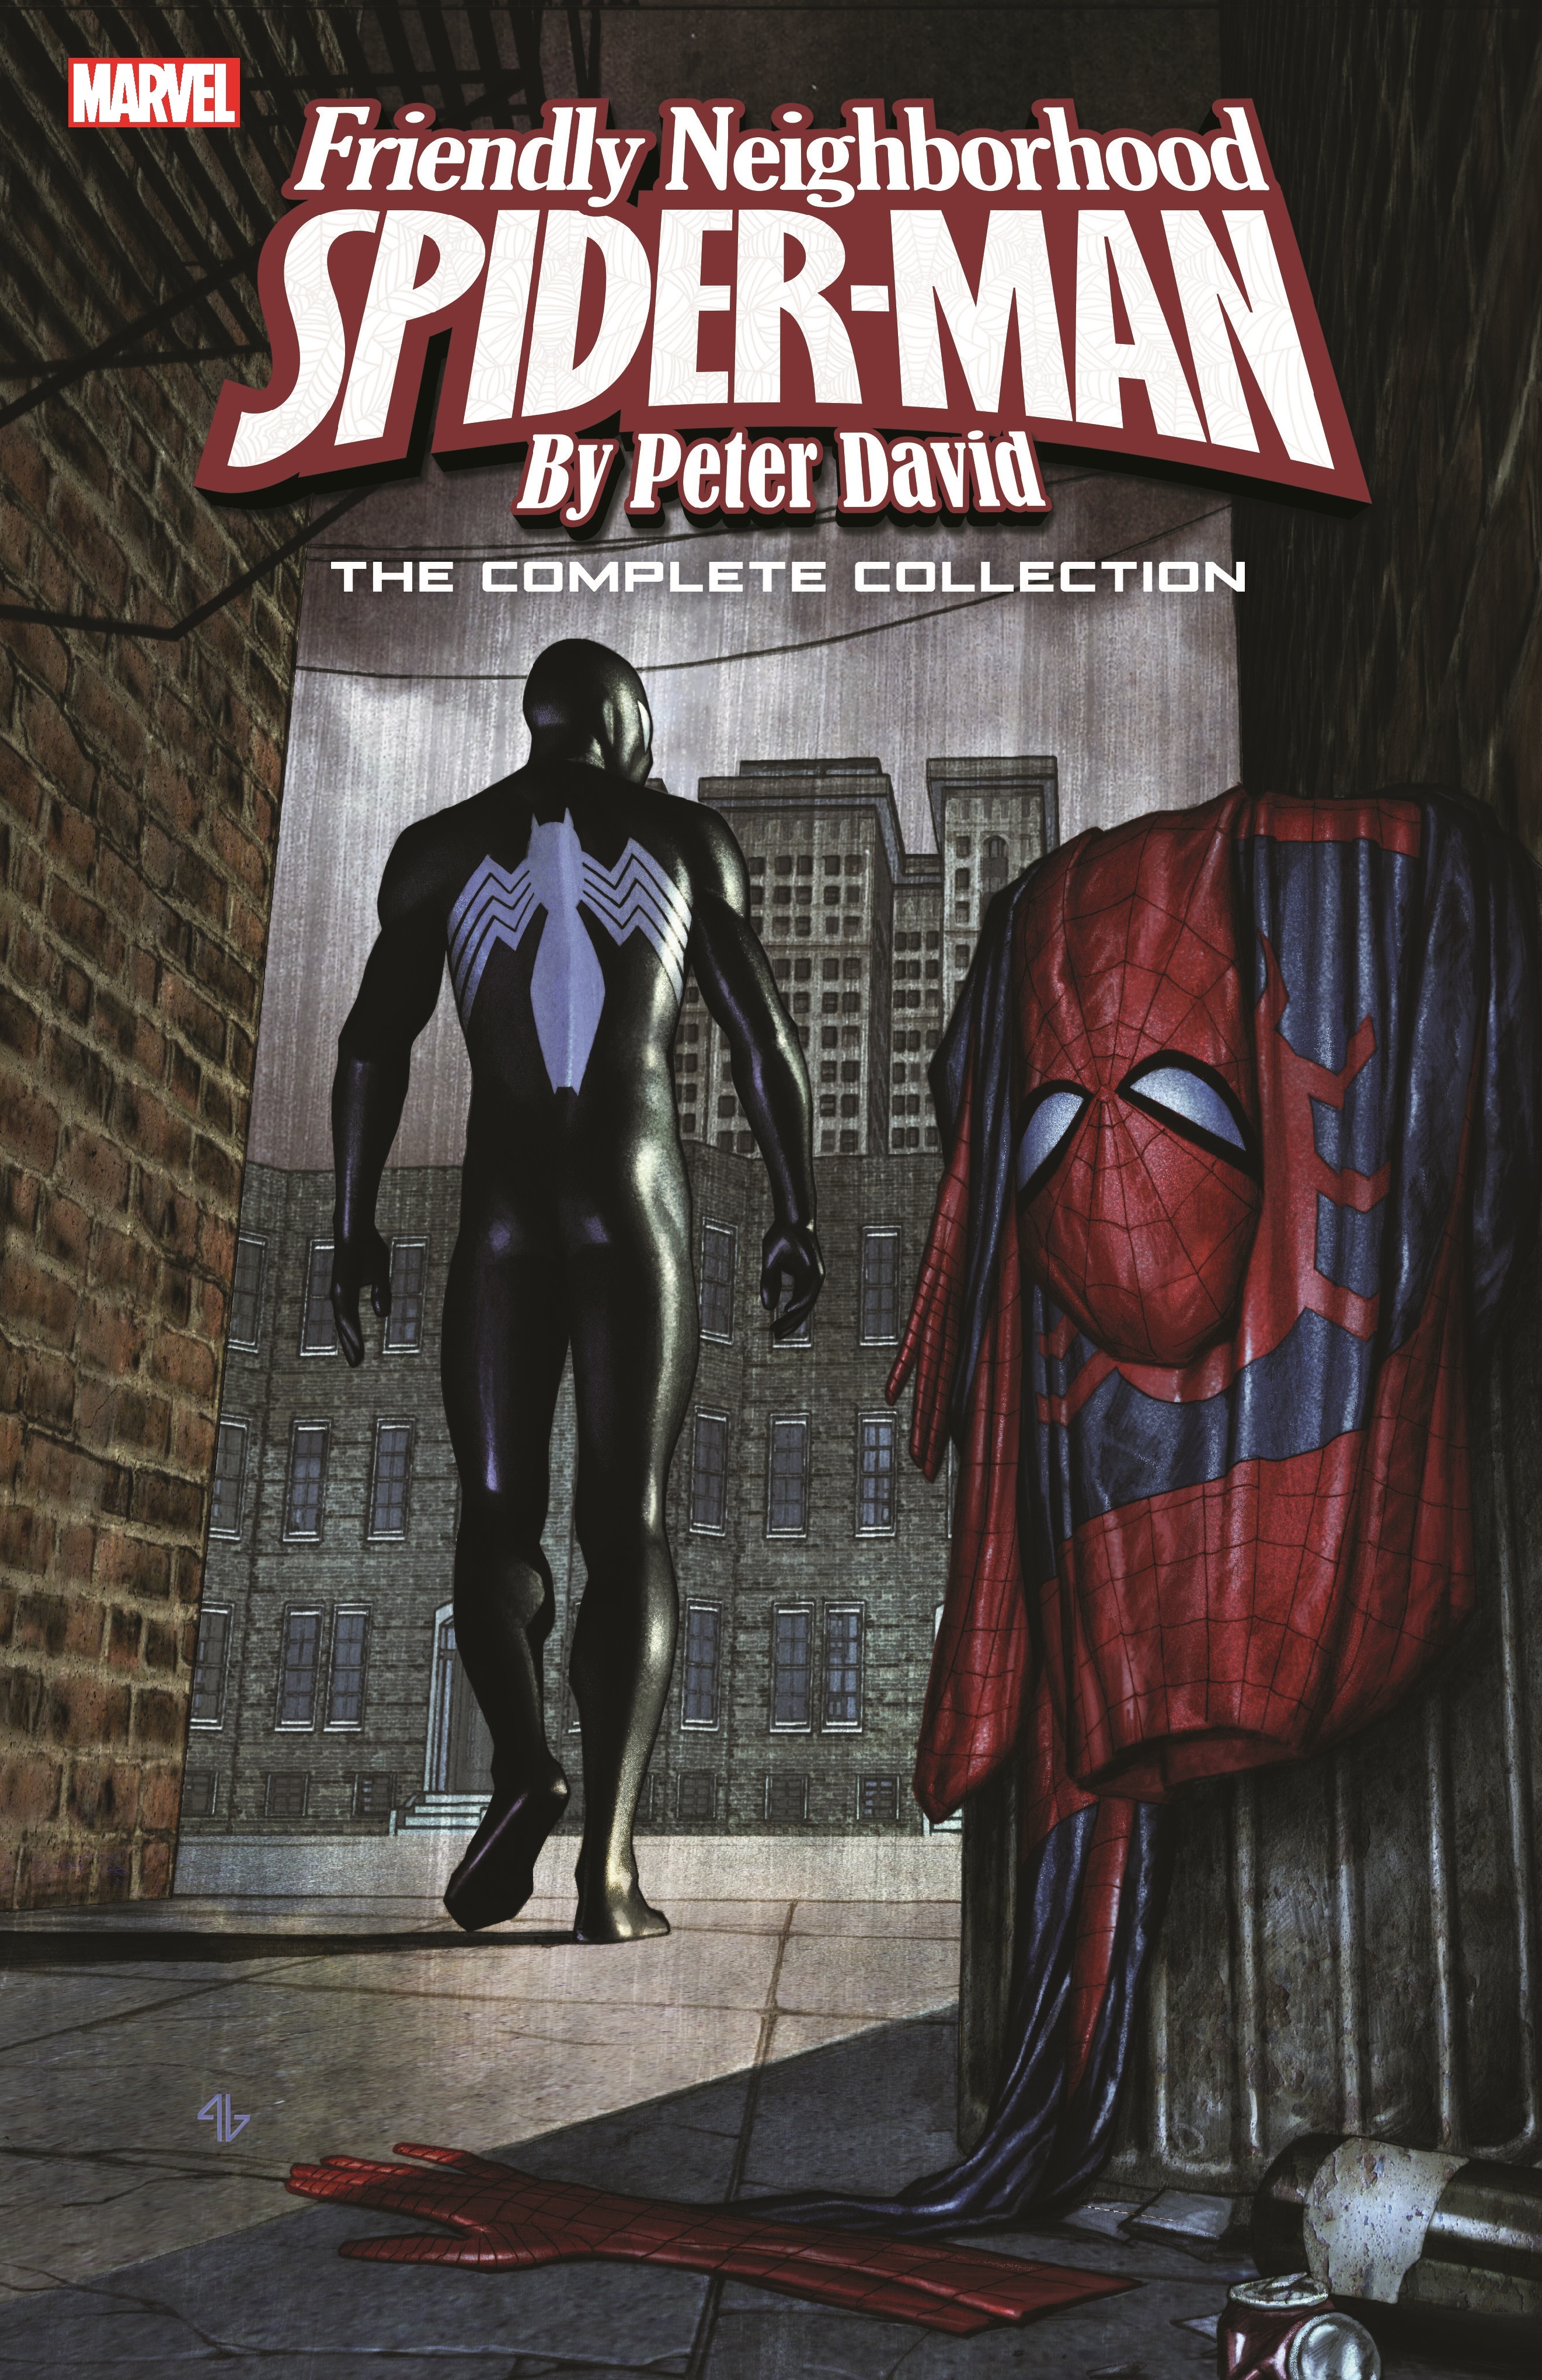 SPIDER-MAN: FRIENDLY NEIGHBORHOOD SPIDER-MAN BY PETER DAVID - THE COMPLETE COLLECTION TPB (Trade Paperback)